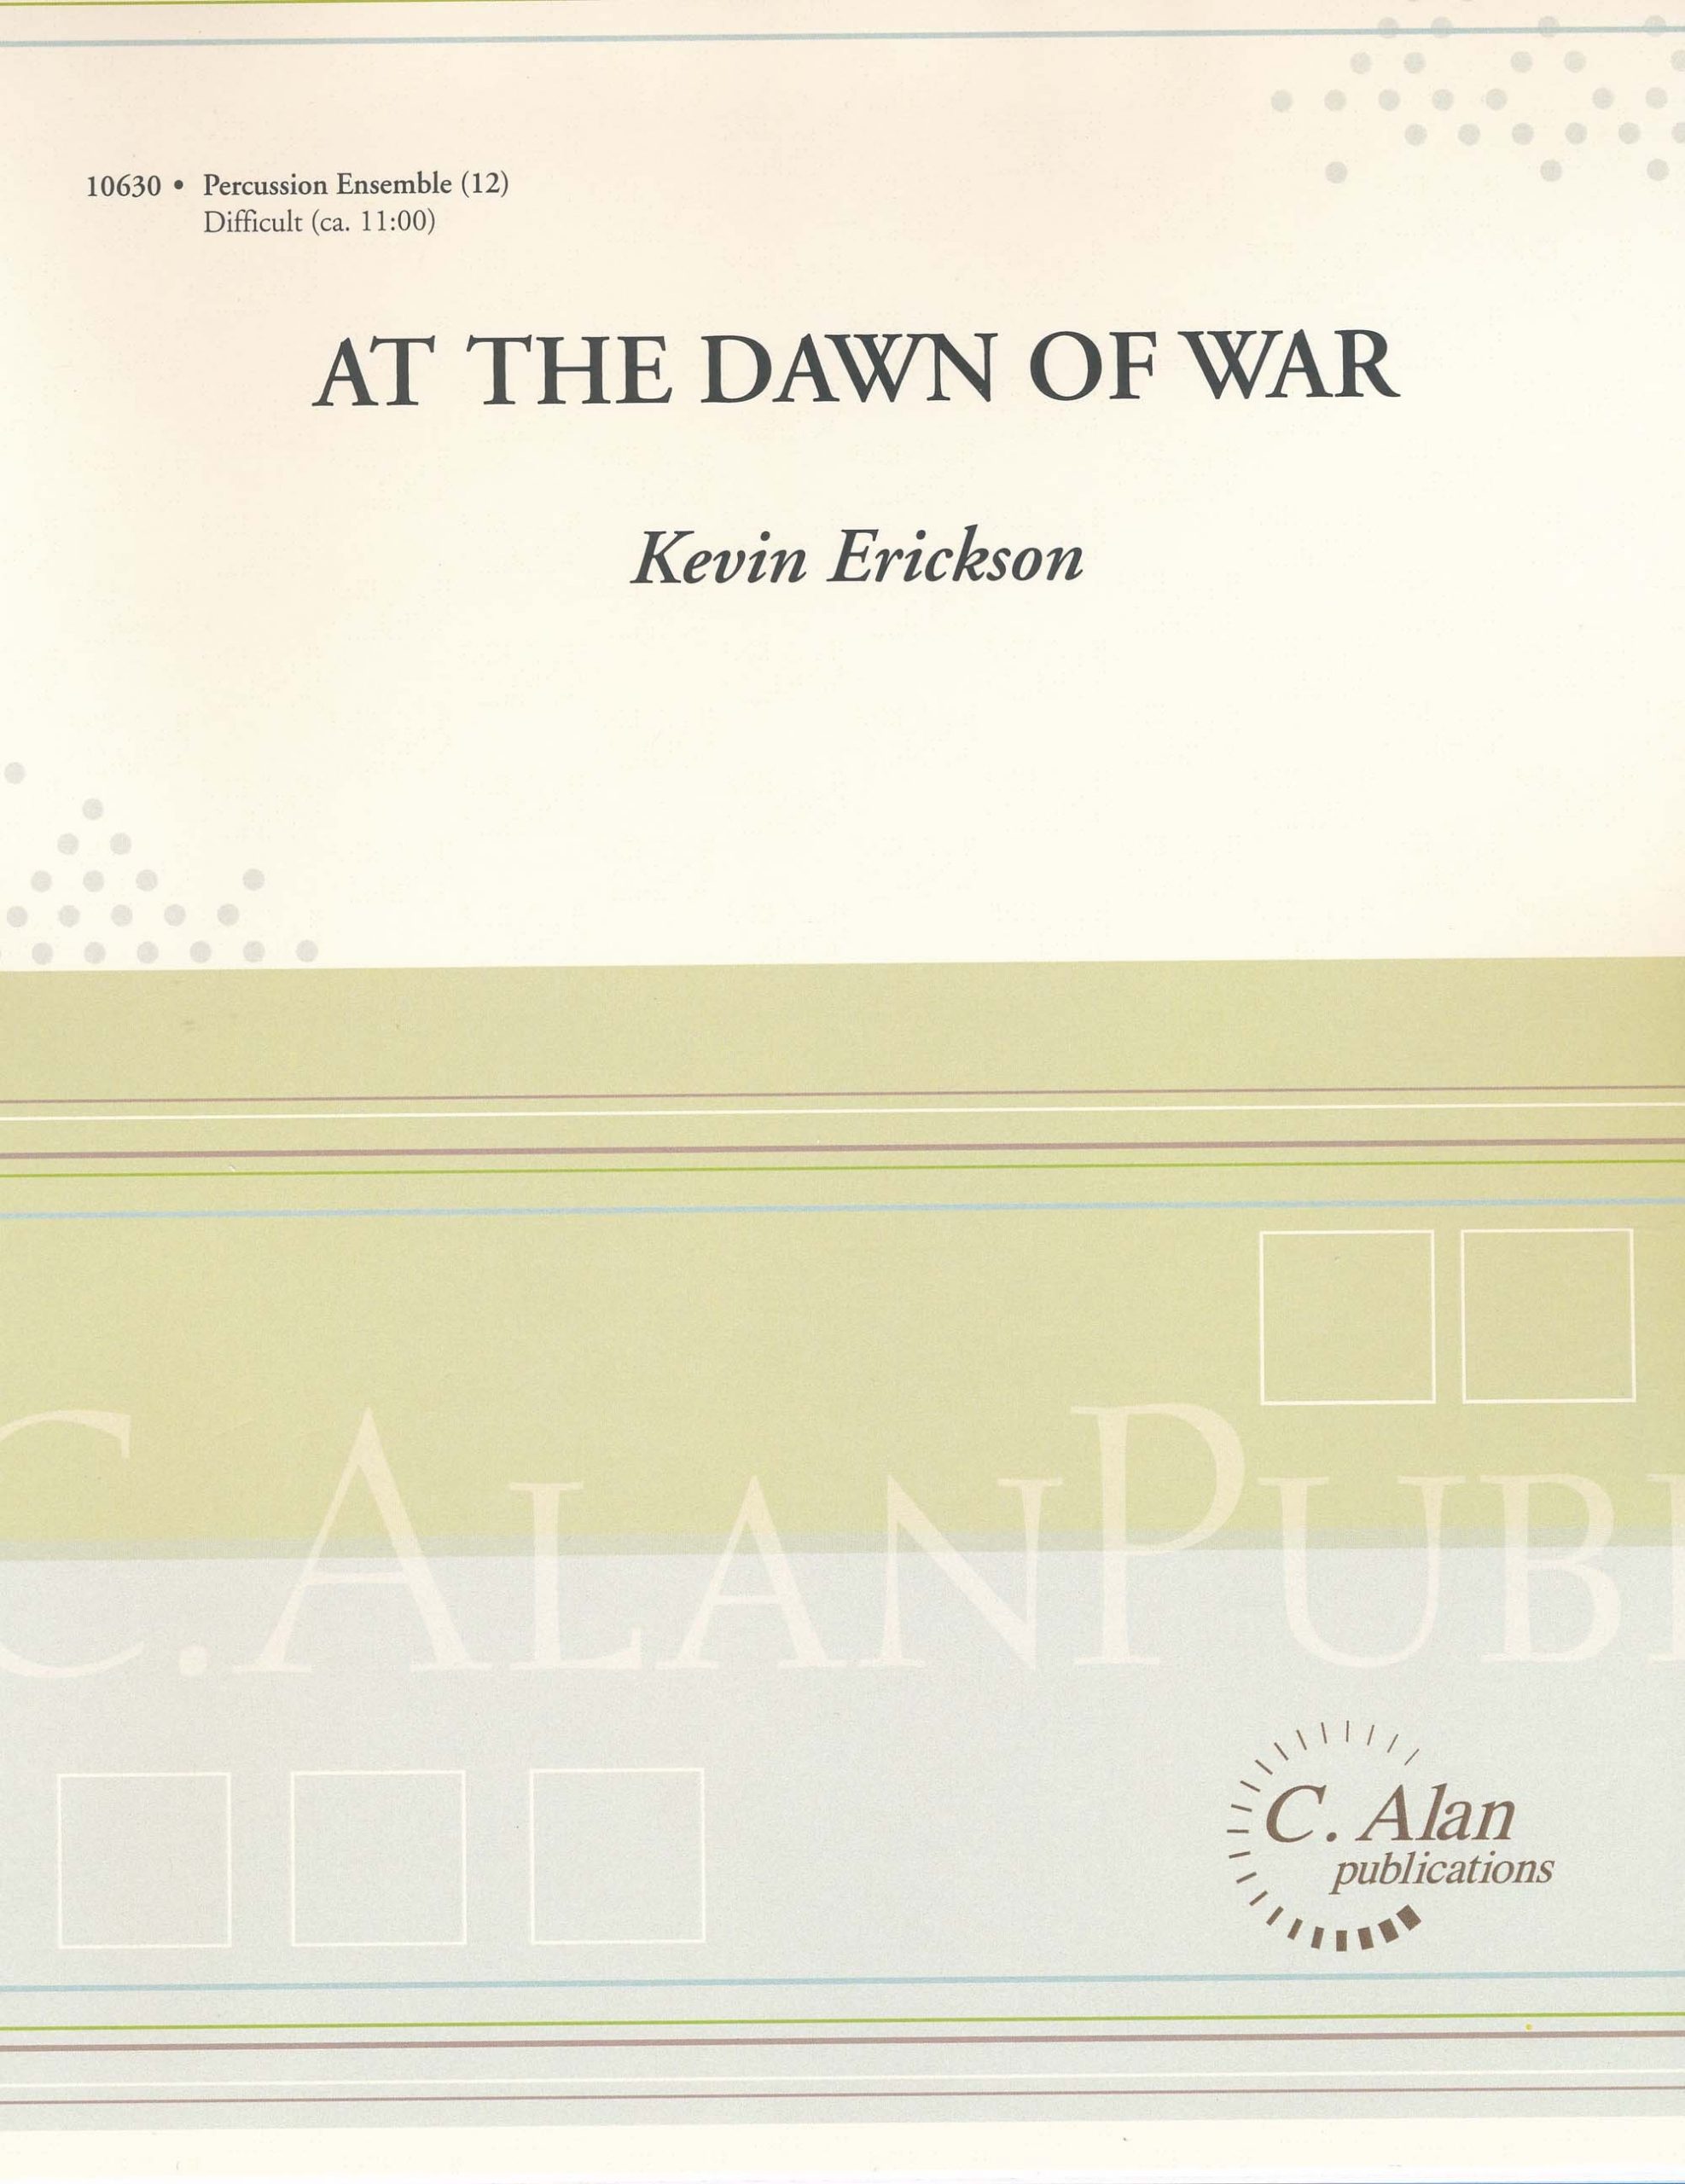 At The Dawn Of War by Kevin Erickson